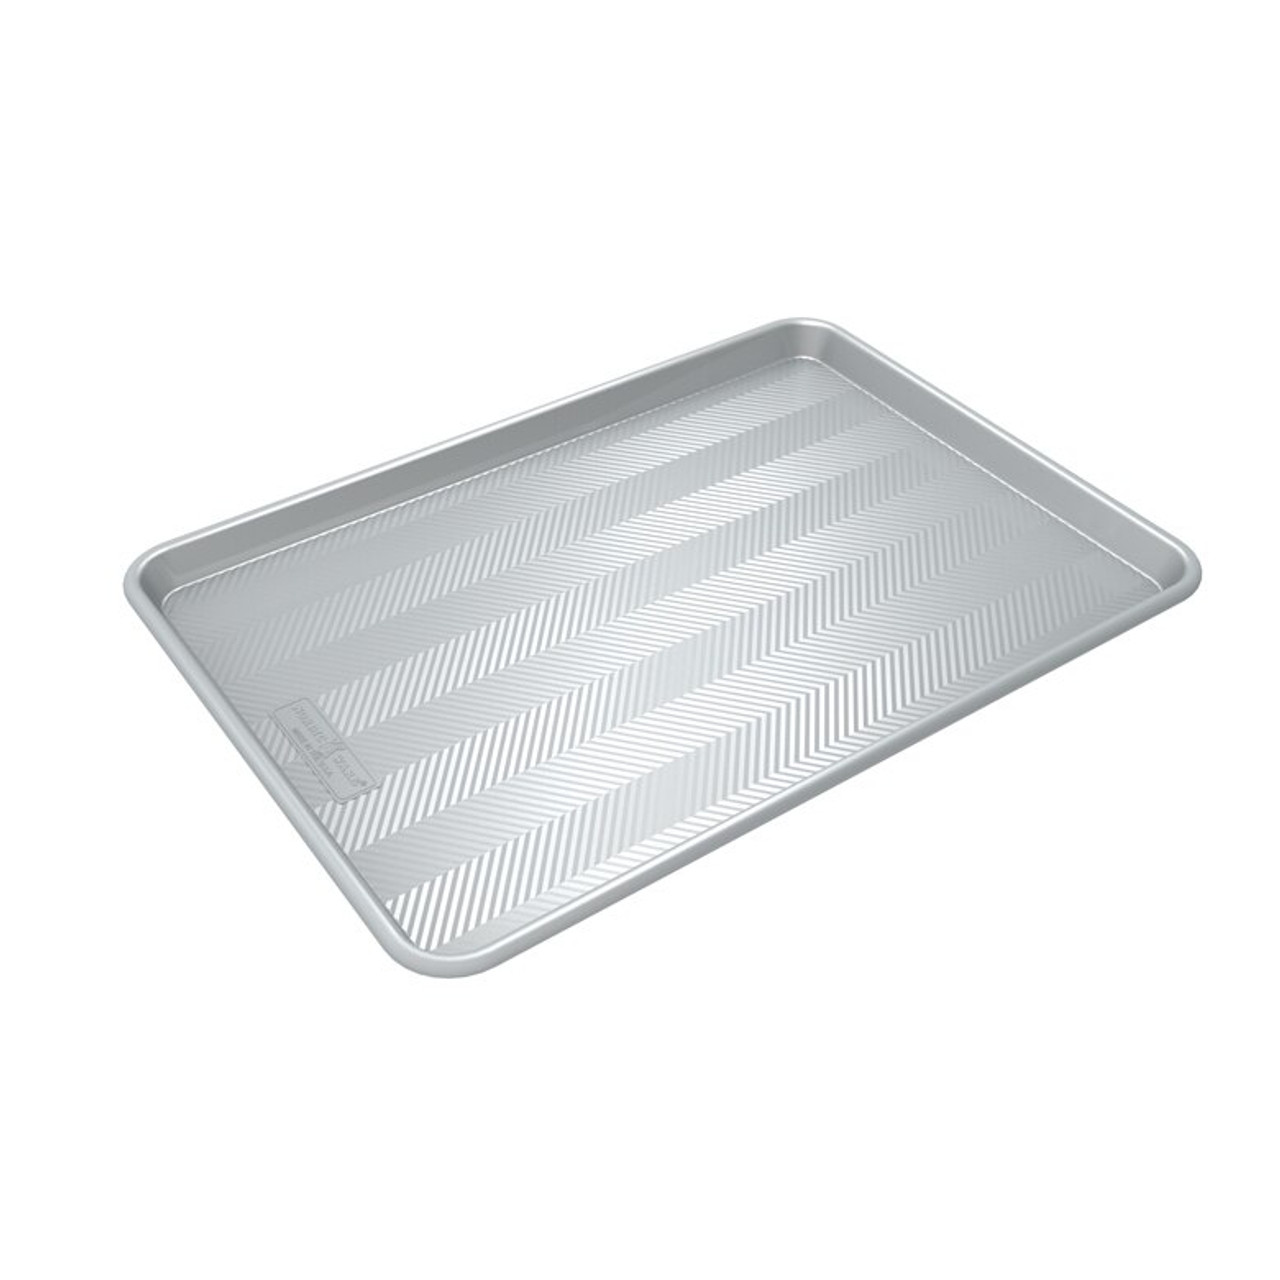 WOXINDA Rimmer Tray Glass And Sugar Rim Bar Dip Sugar Seasoning Plate Flat  Cookie Sheet No Edges Non Small Cookie Sheets for Baking Nonstick 7 by 9